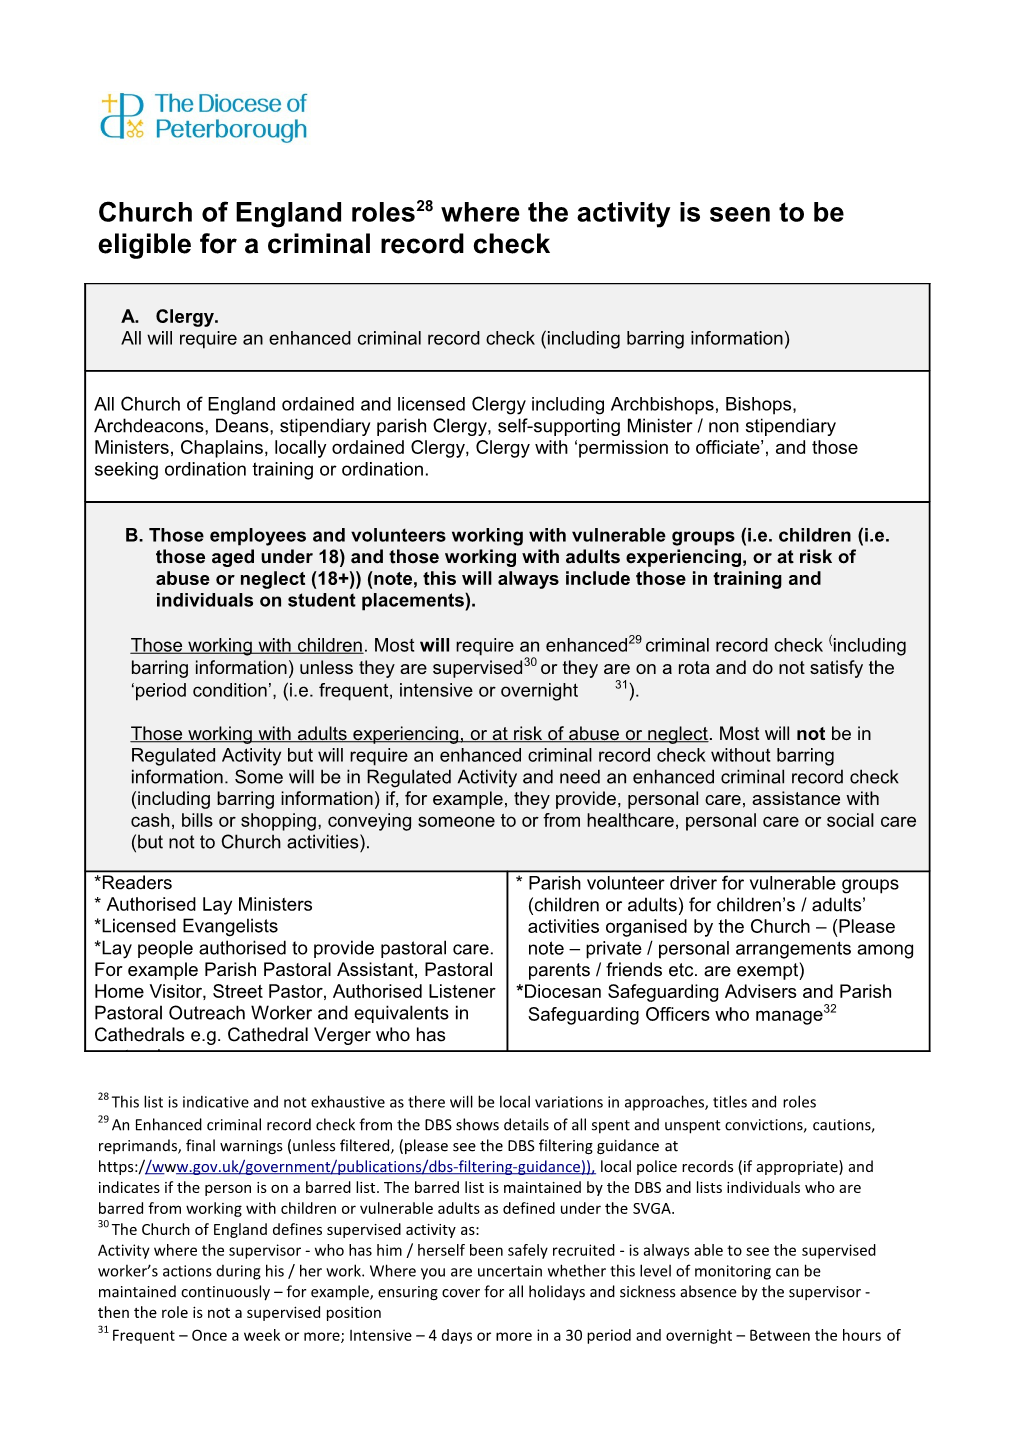 Church of England Roles28where the Activity Is Seen to Be Eligible for a Criminalrecord Check